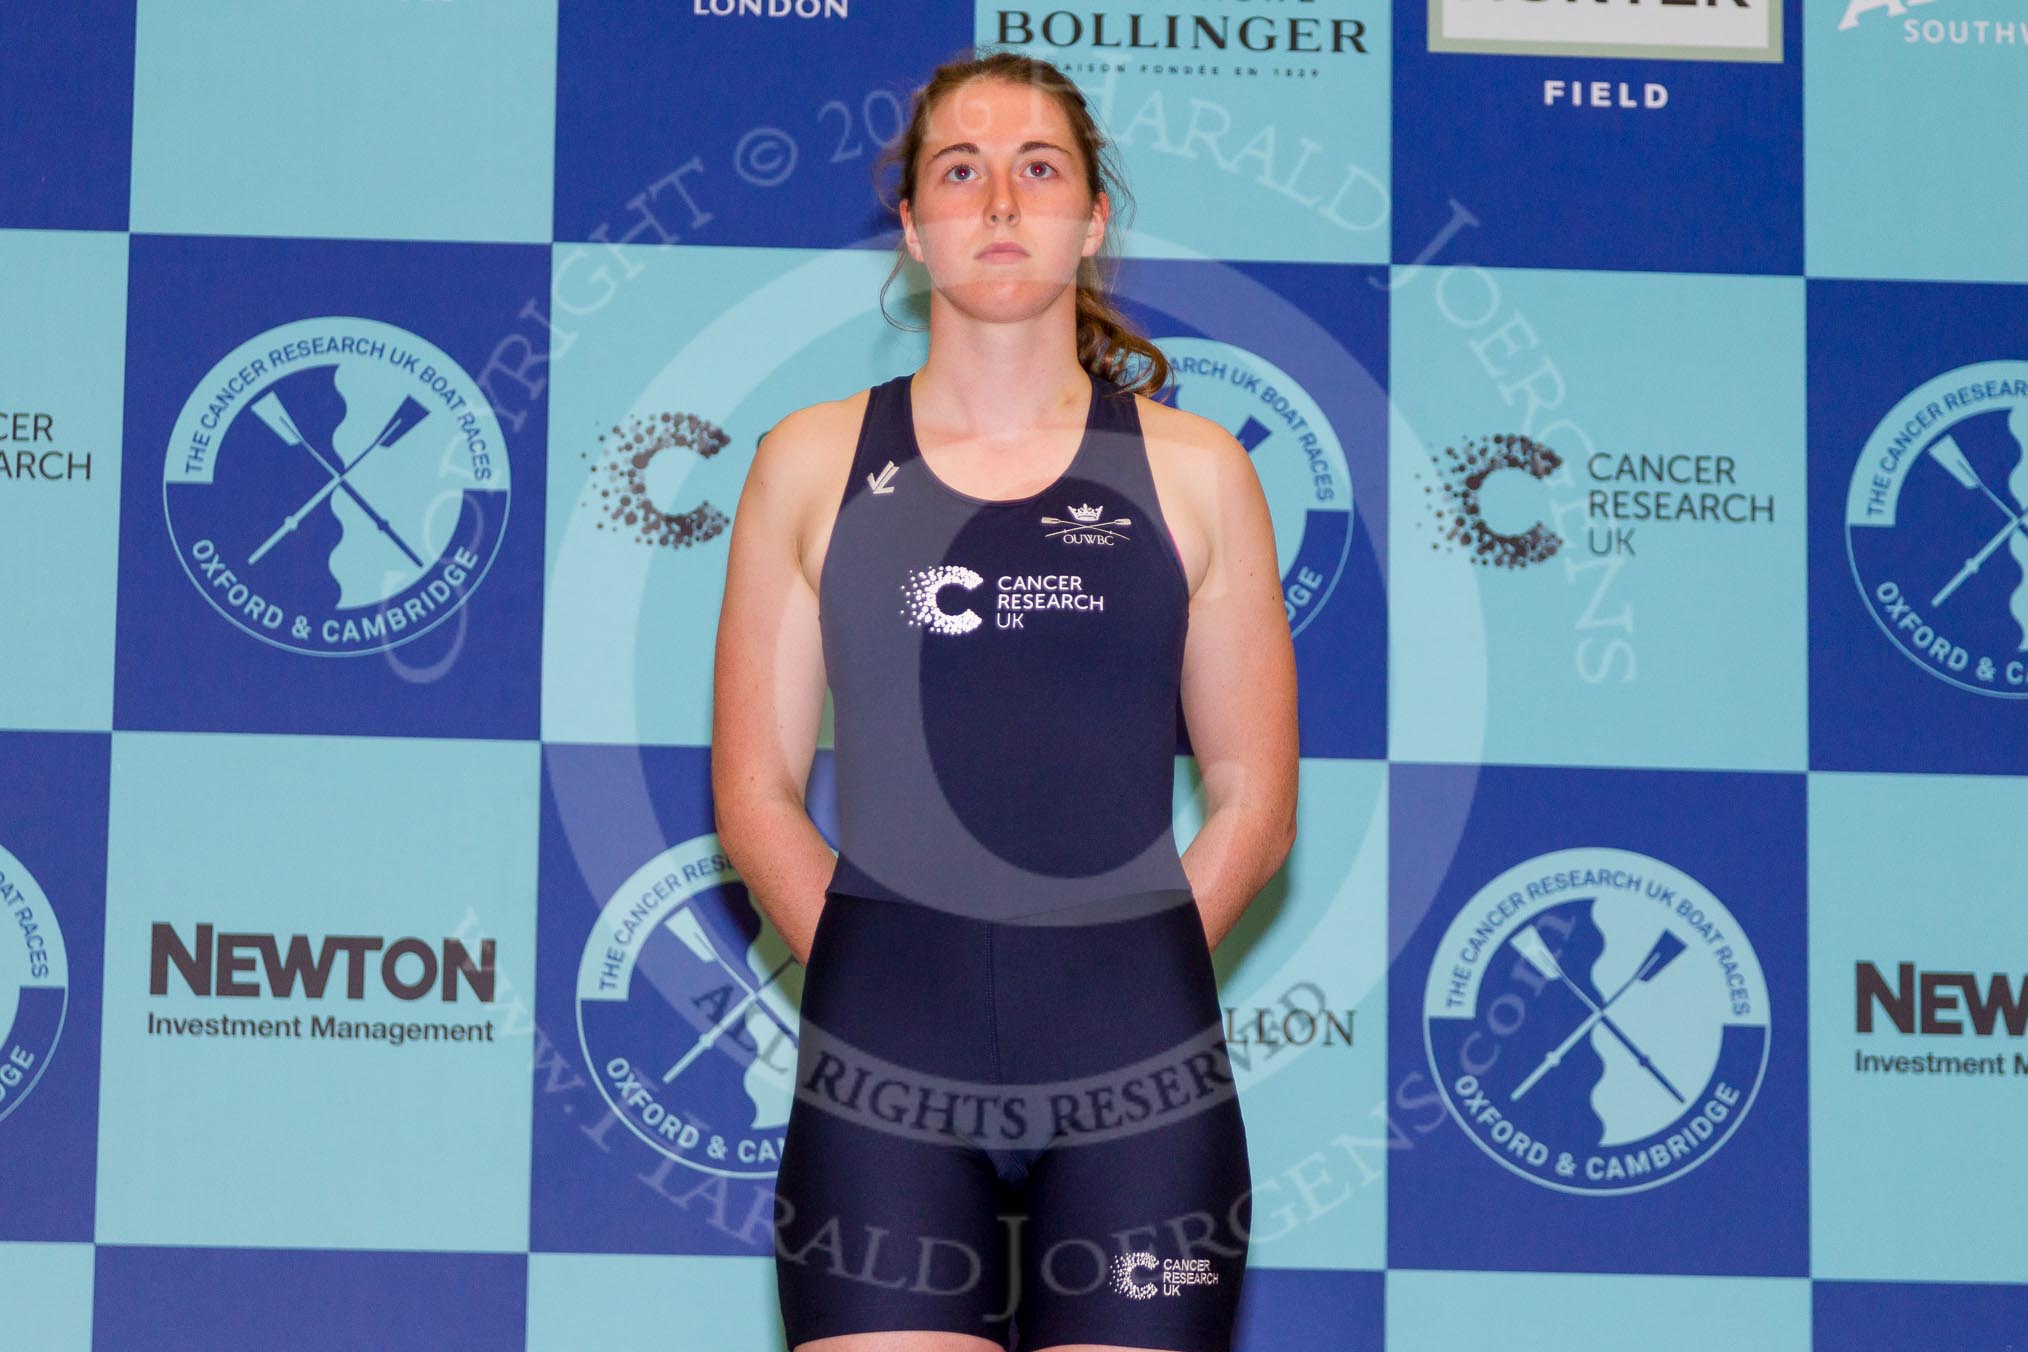 The Boat Race season 2016 - Crew Announcement and Weigh-In: The Women's Boat Race, 4 seat: Oxford: Ruth Siddorn – 75.2kg.
Westmister Hall, Westminster,
London SW11,

United Kingdom,
on 01 March 2016 at 10:11, image #29